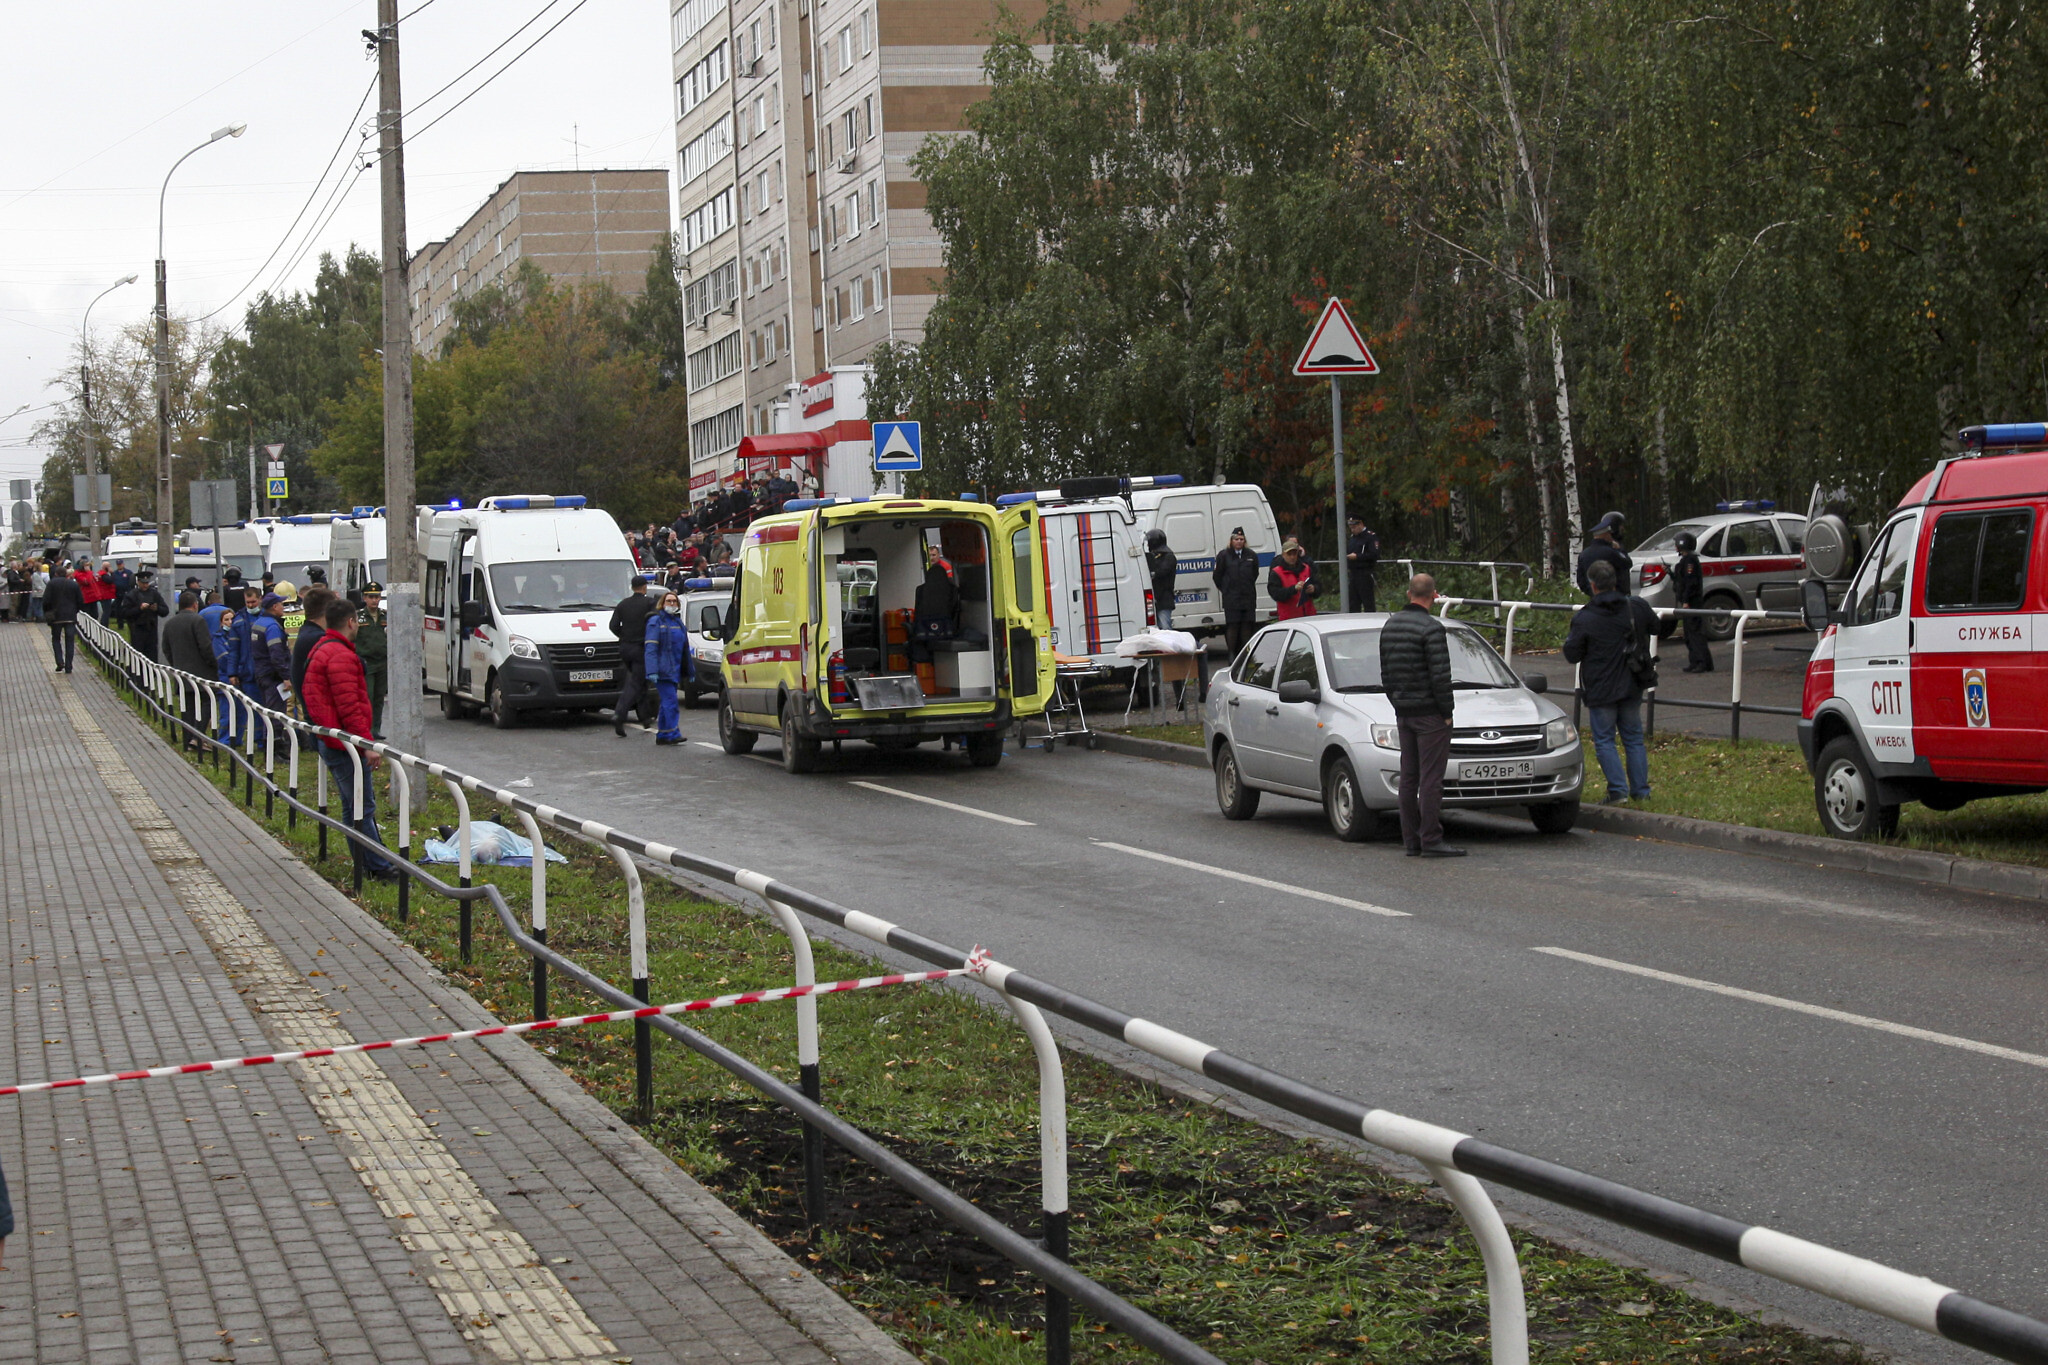 13 killed, 21 injured as gunman wearing 'Nazi symbols' opens fire at Russian  school | The Times of Israel